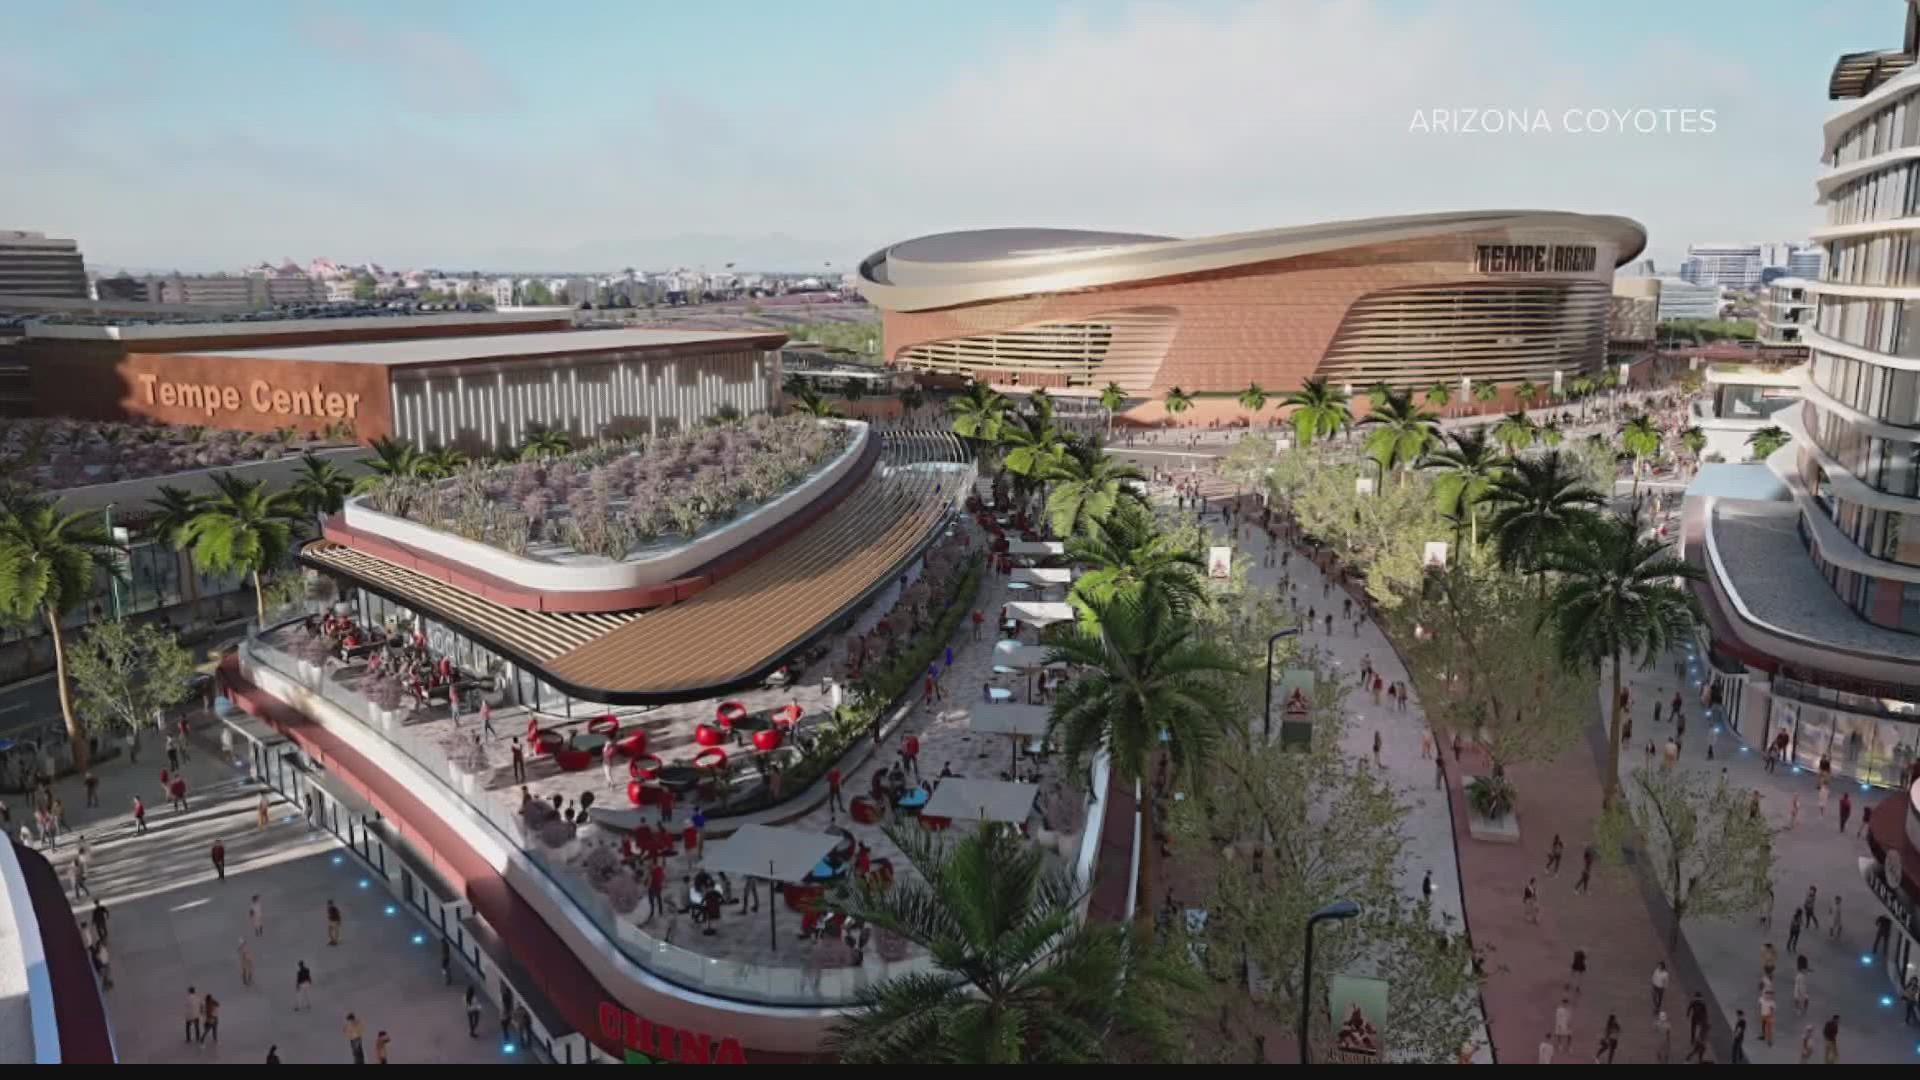 The "yes" vote Thursday night allows the City of Tempe and the Arizona Coyotes to begin negotiations toward a potential deal.